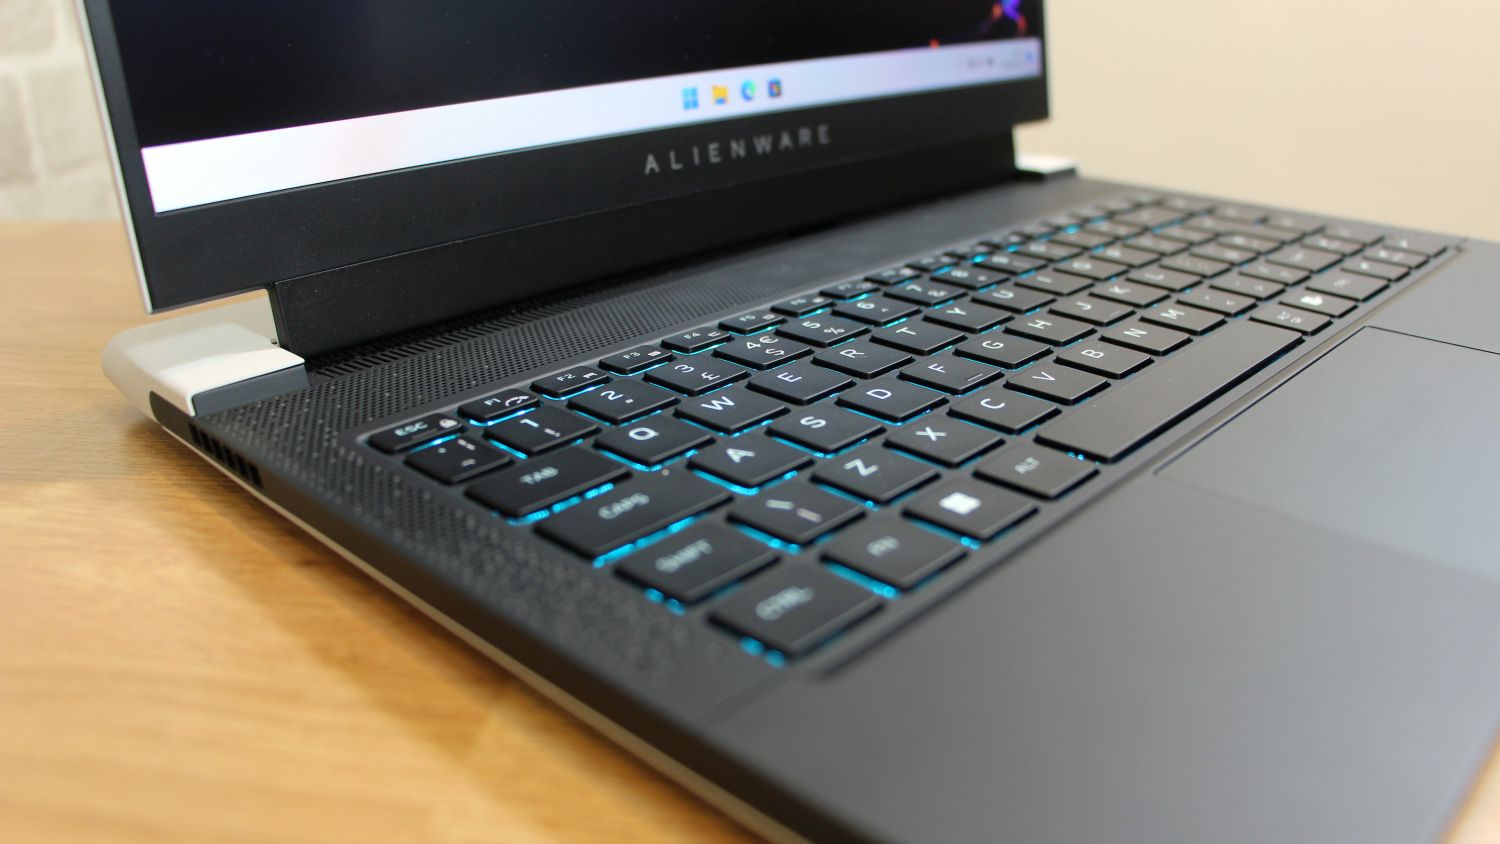 Alienware x14 laptop open, close up view of illuminated keyboard